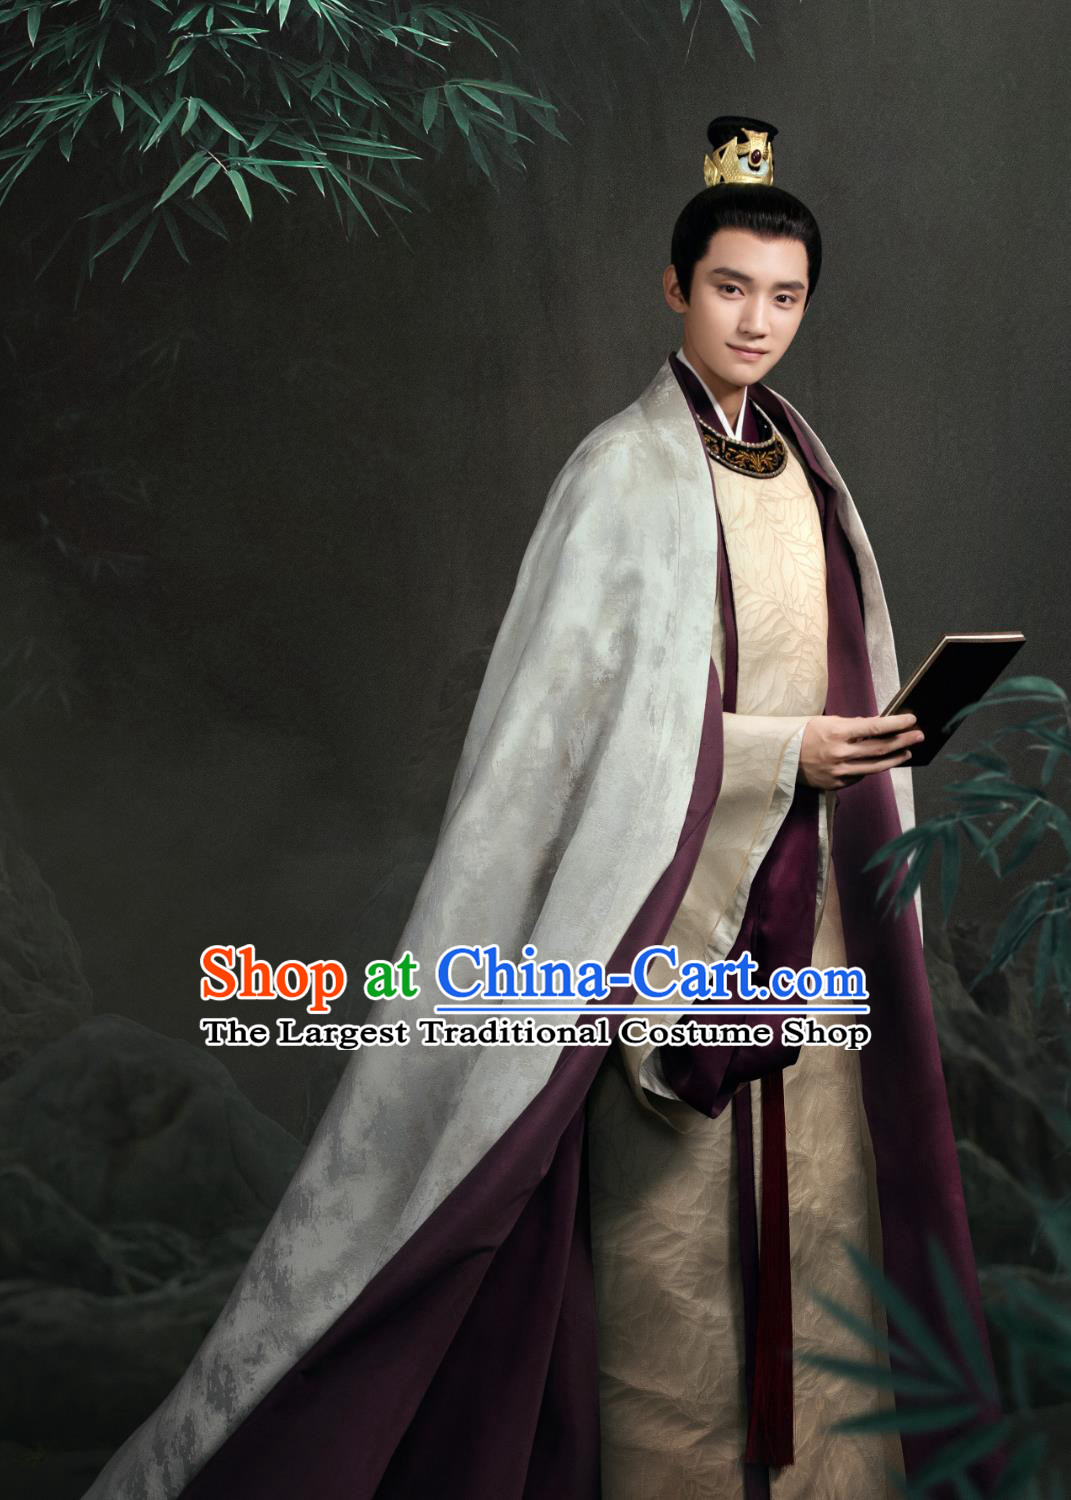 China Ancient Imperial Emperor Garment Costumes TV Drama The Legend of Zhuohua Royal Lord Liu Chen Outfit